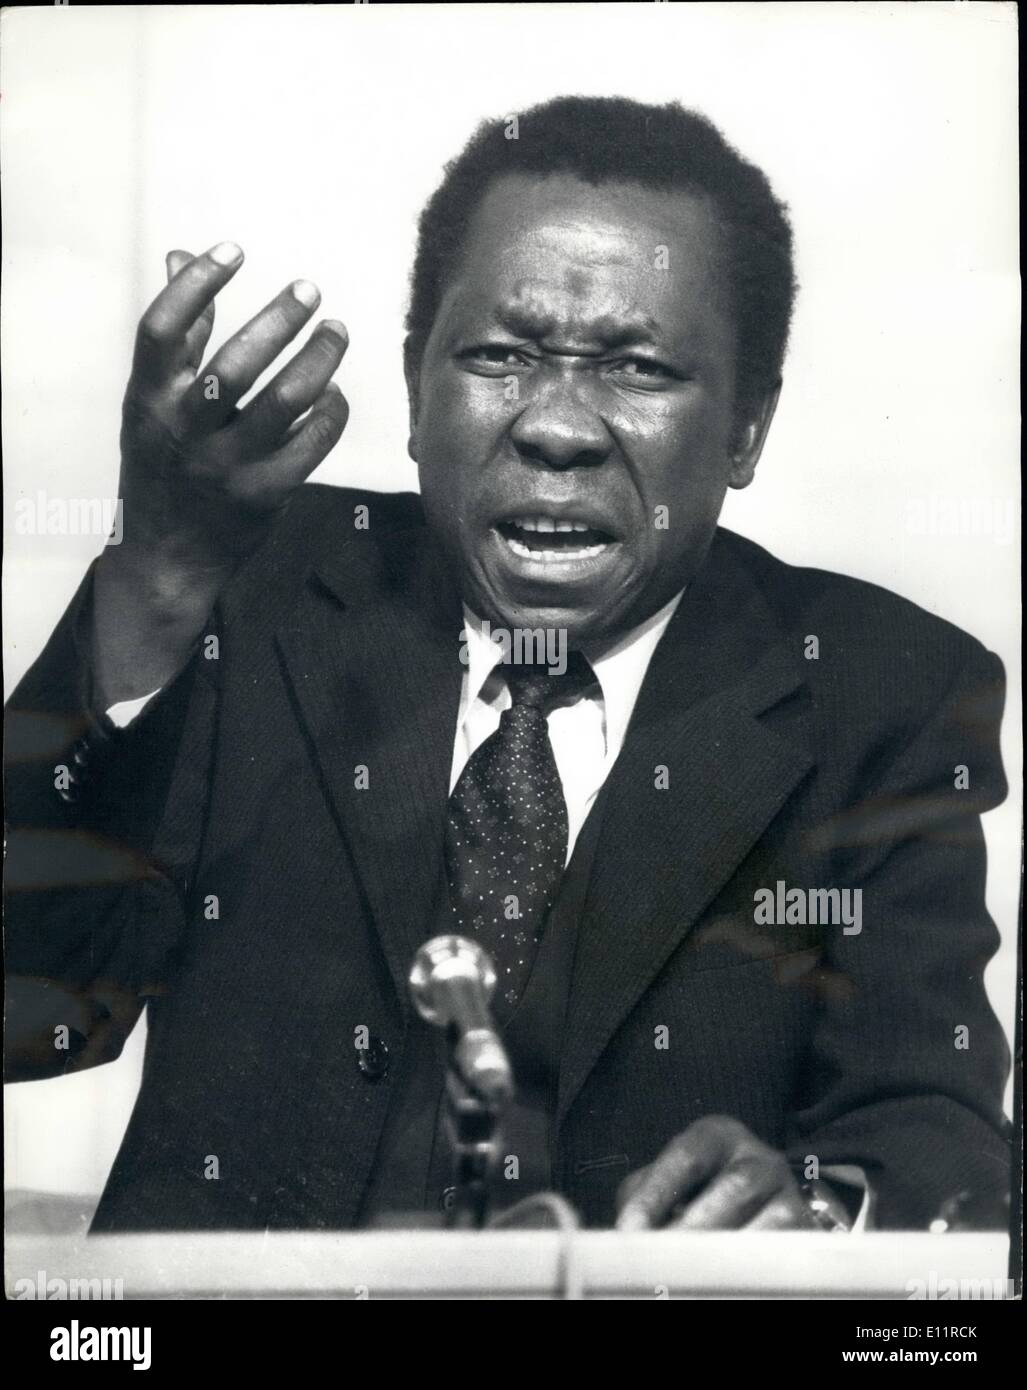 Oct. 10, 1979 - PATROITIC FRONT PRESS CONFERENCE The Patriotic Front held a press conference this morning to announce their views on the future of the Zimbabwe Rhodesia talks at Lancaster House, PHOTO SHOWS Dr Eddison Zvobgo spokesman for the Patriotic Front seen during the Press conference in London today. Stock Photo